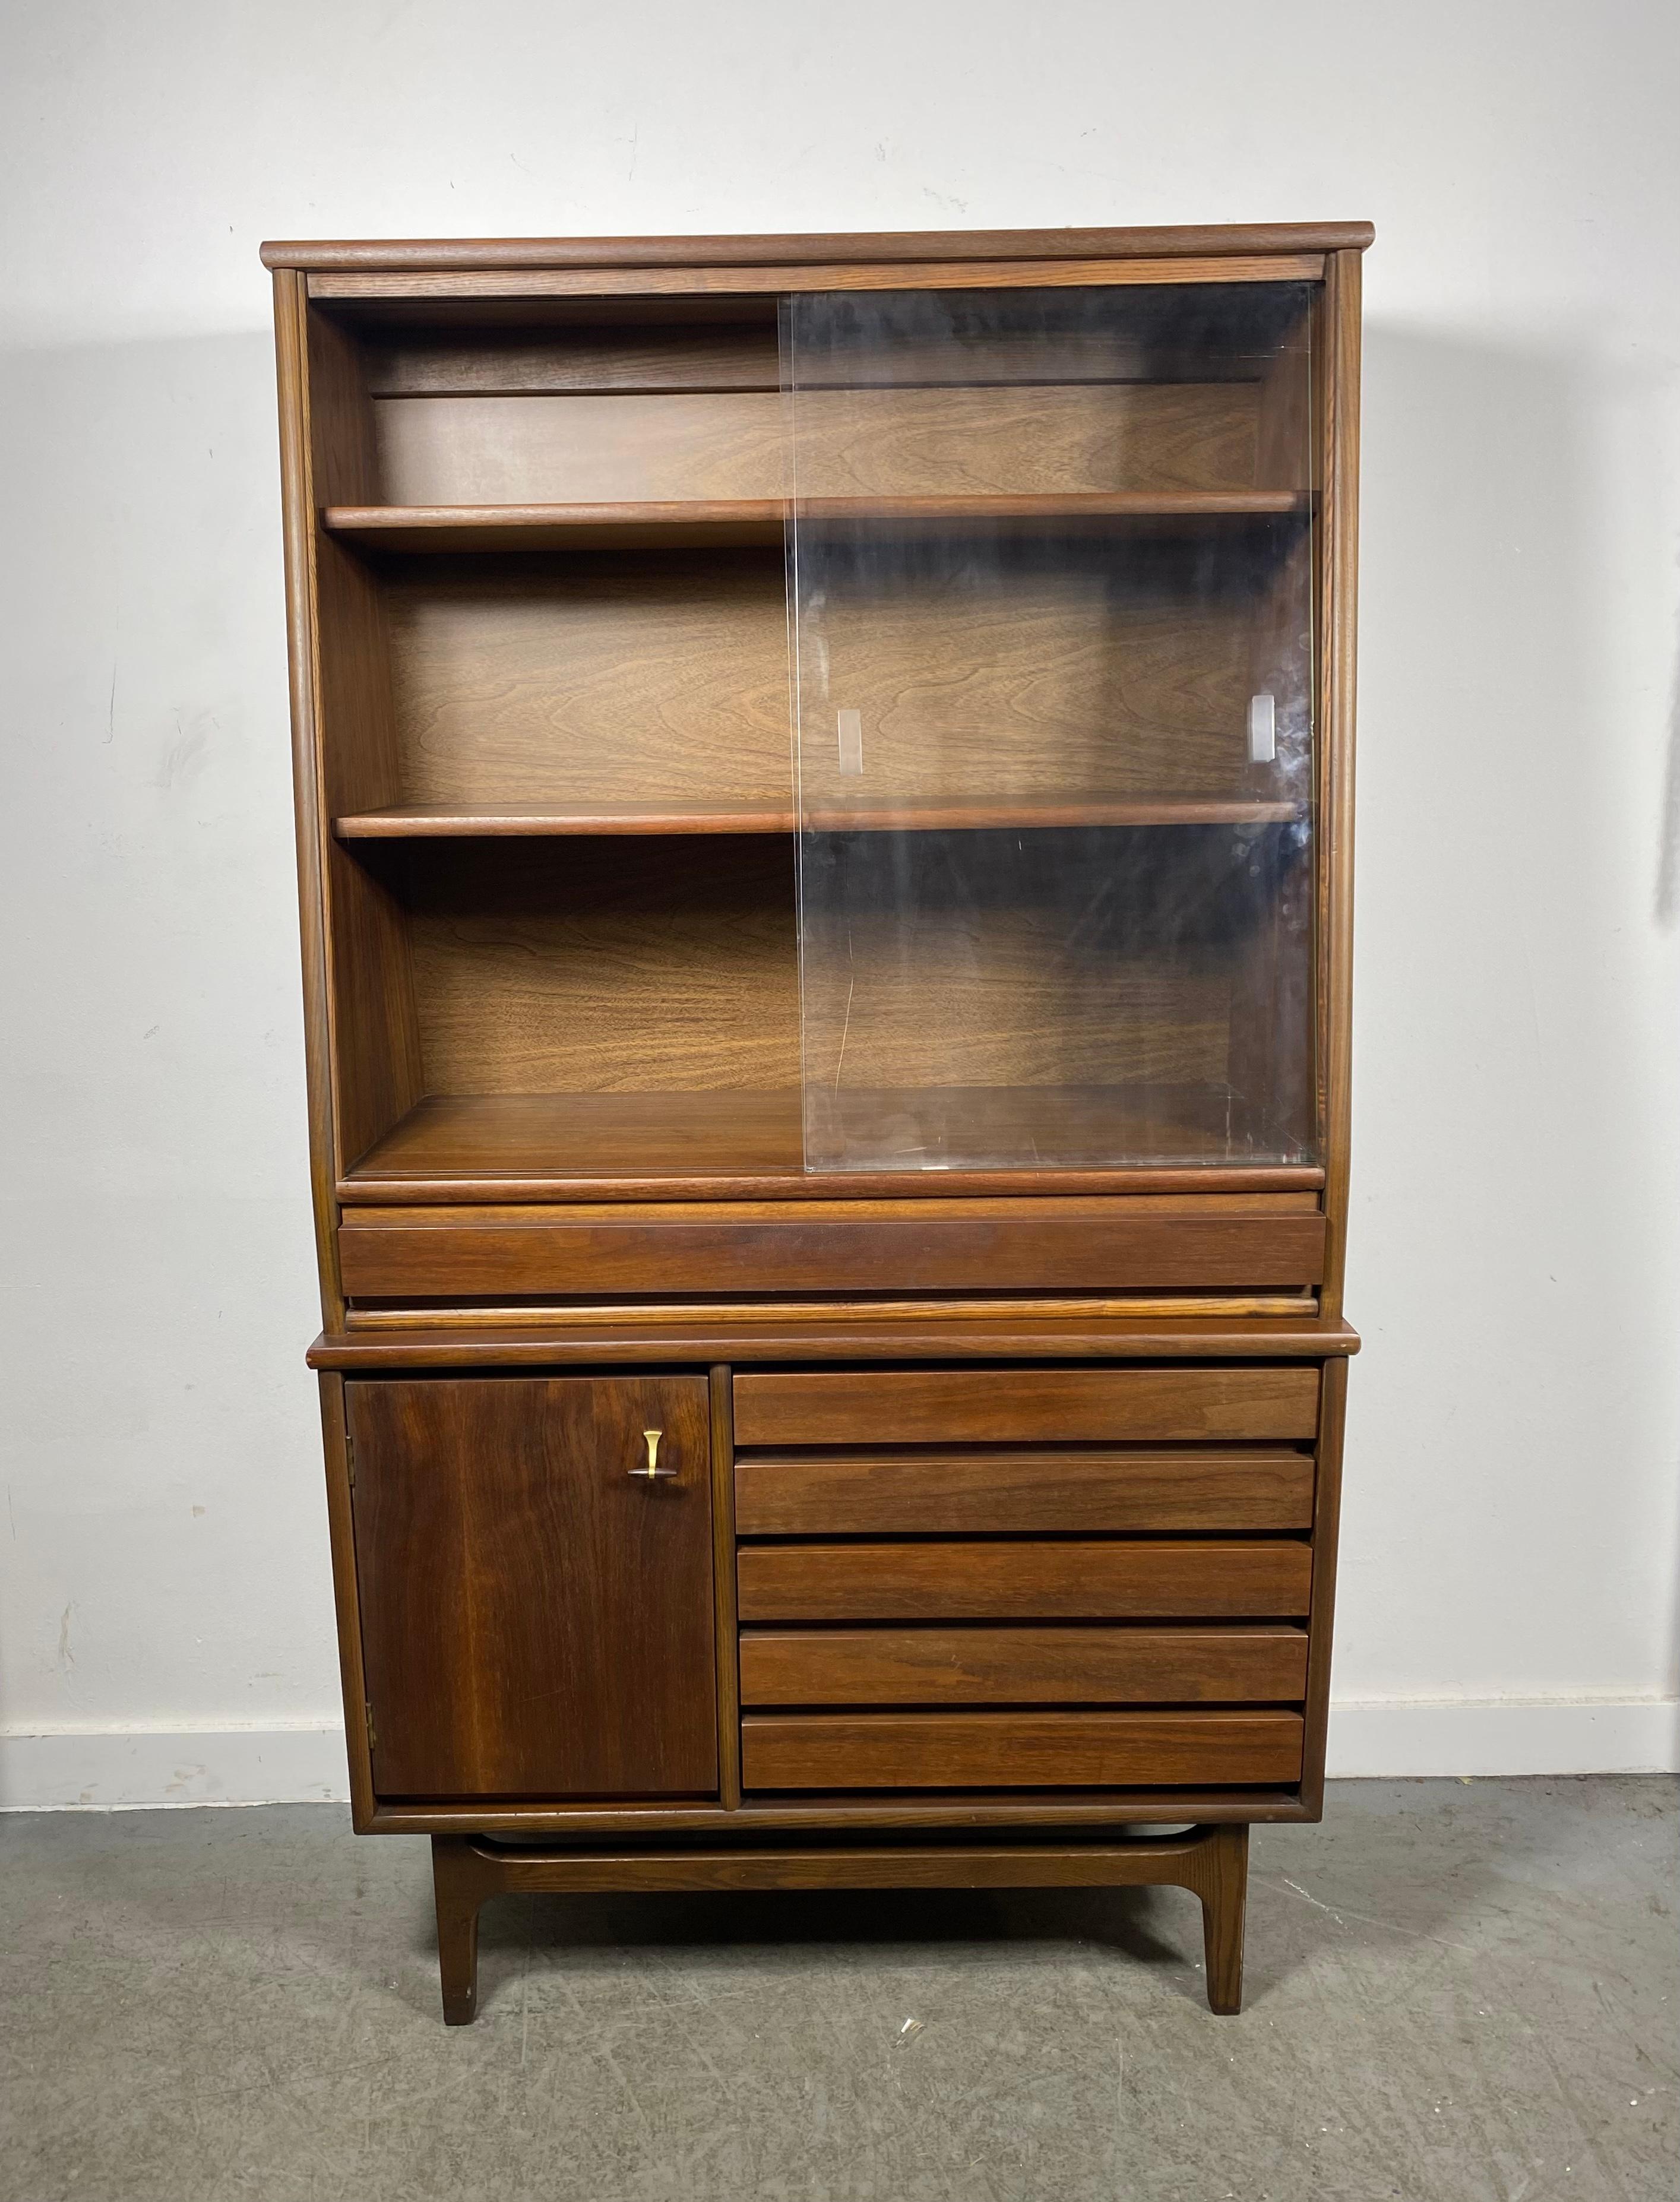 American Classic Mid Century Modern Cabinet in Walnut by Stanley 